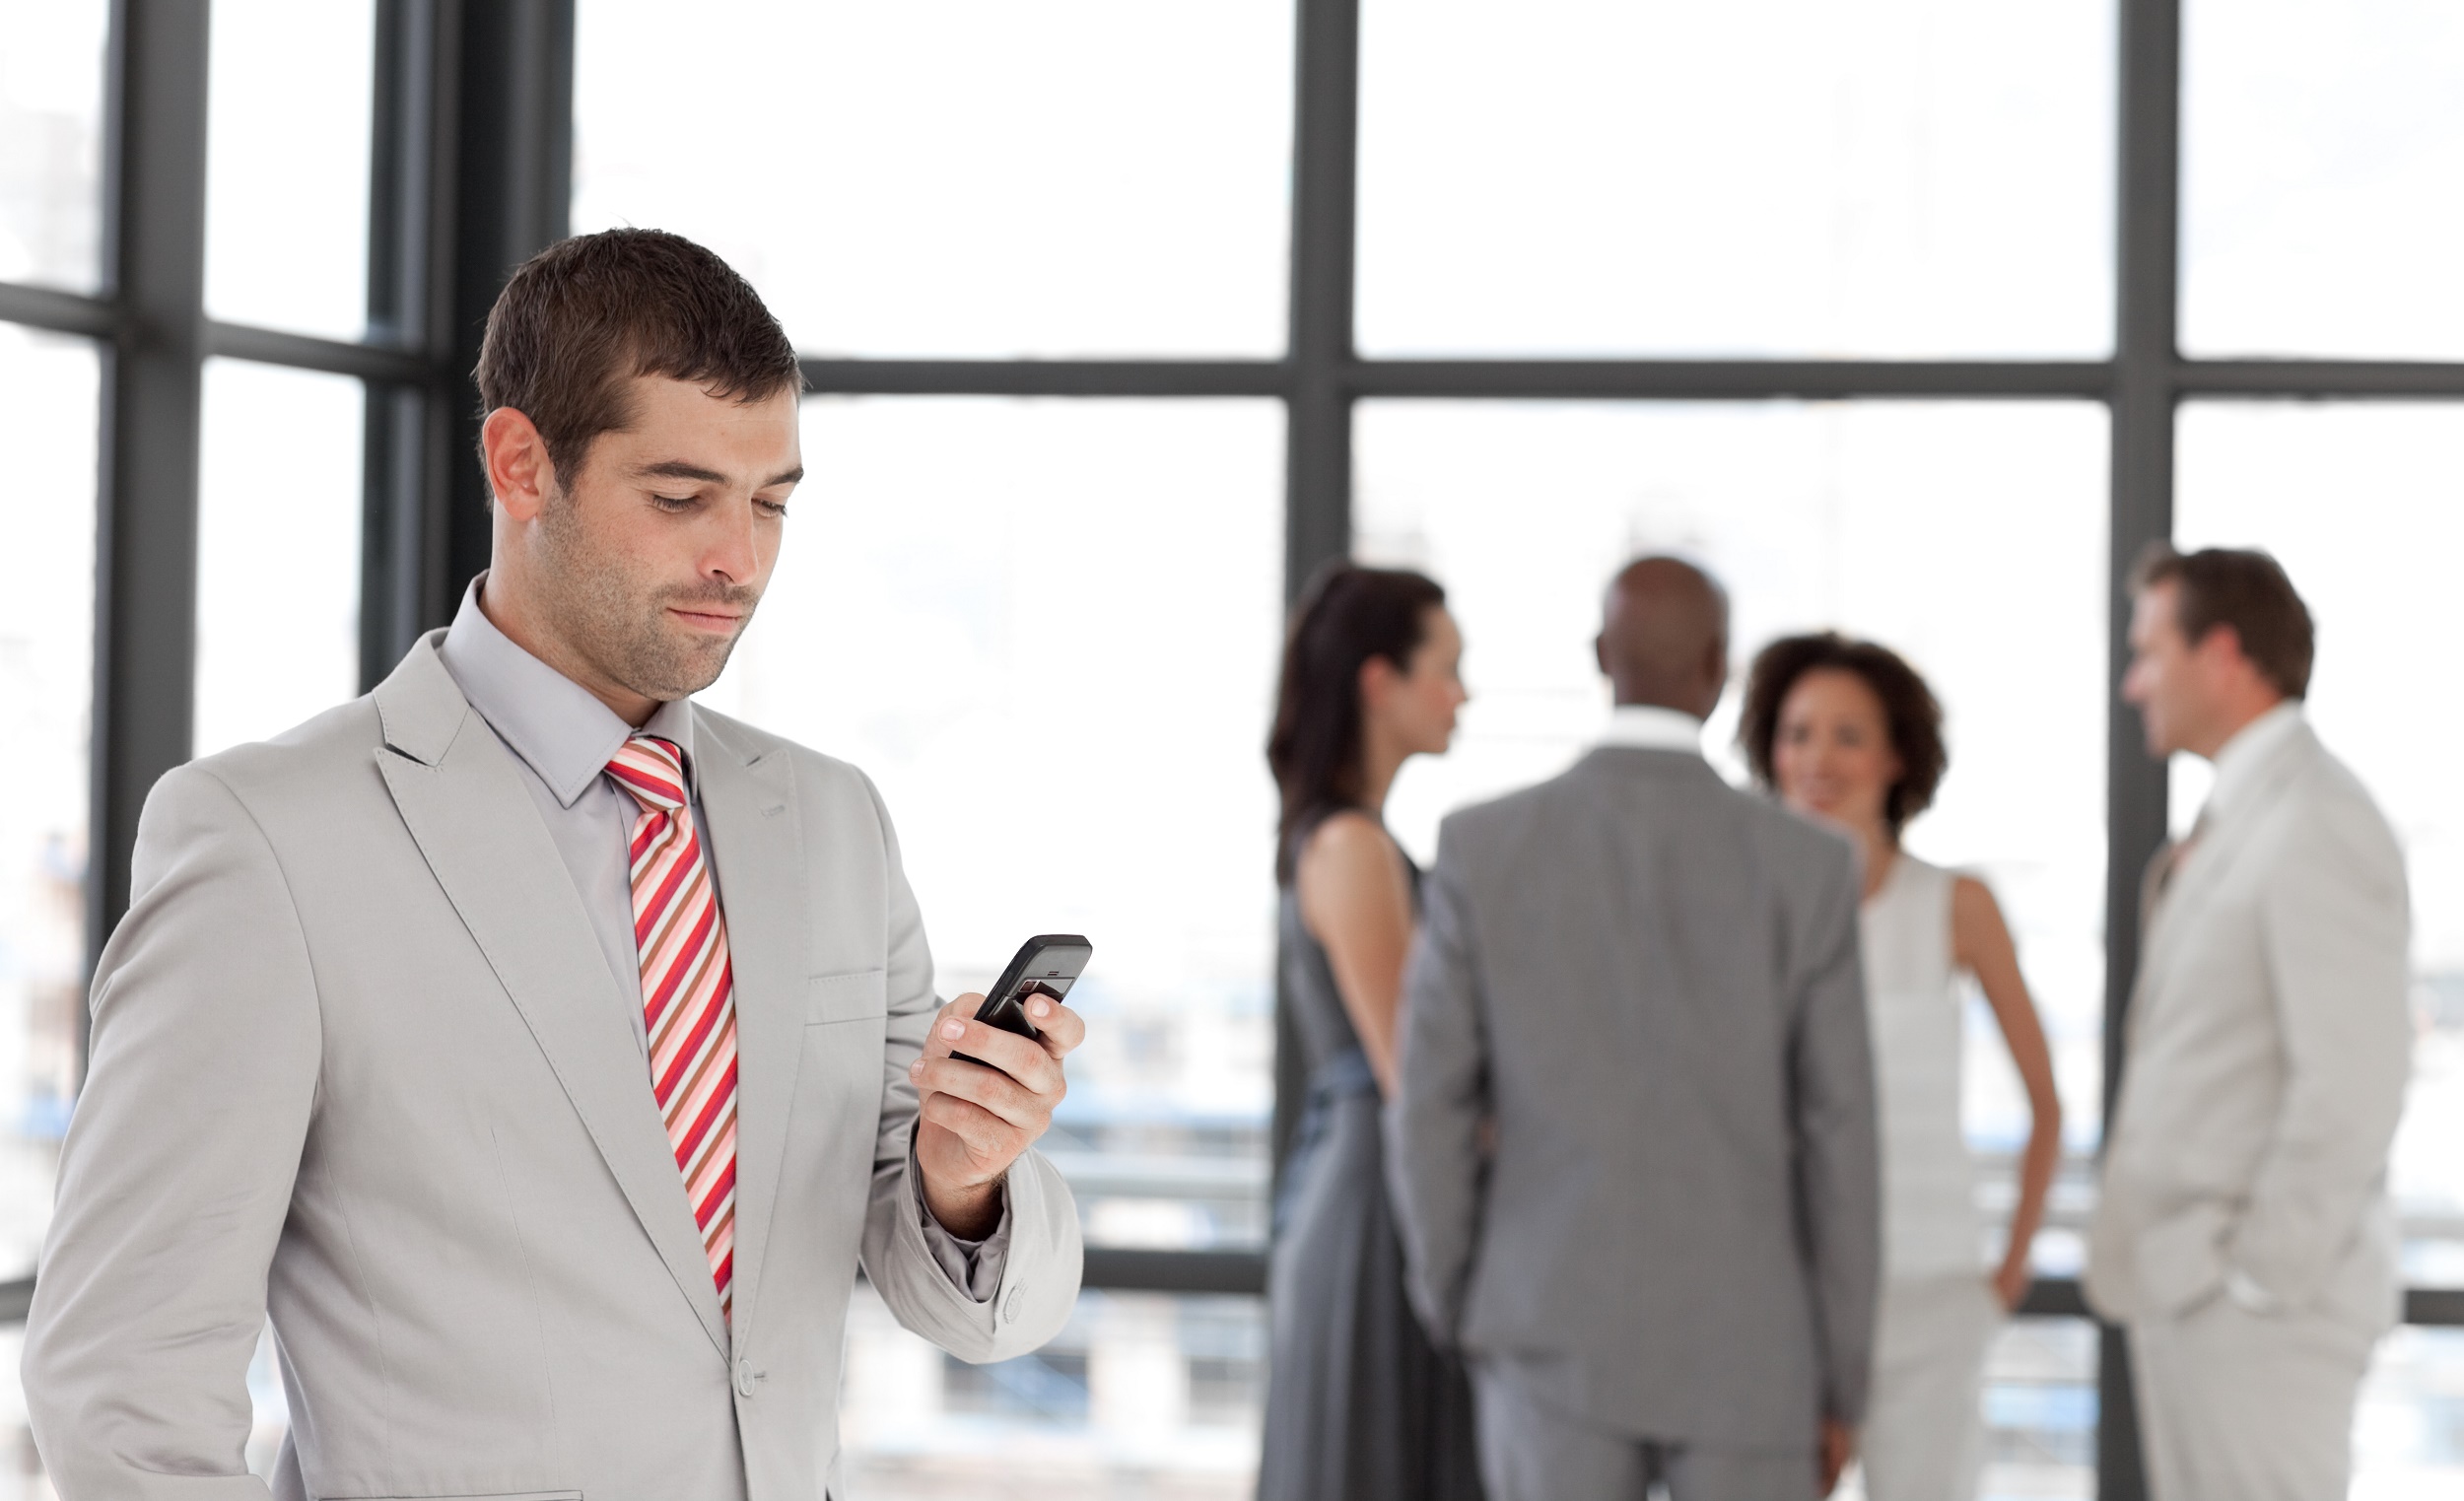 Smiling businessman holding a phone at workplace with his colleagues